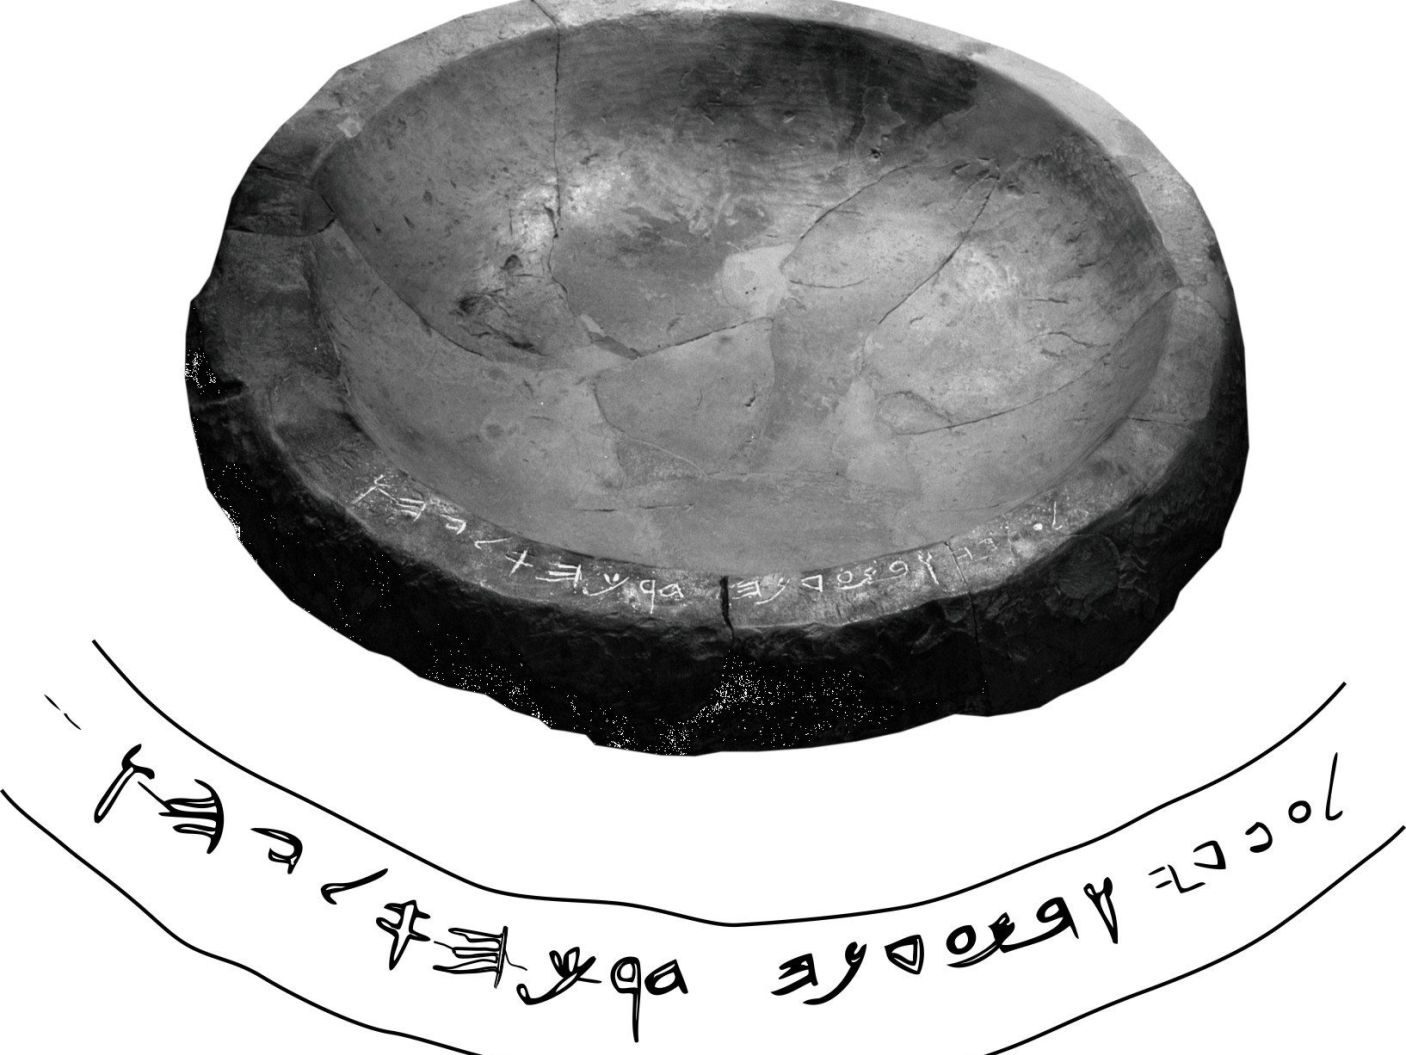 Ancient Hebrew writing on the rim of a bowl found at Kuntillet Ajrud, dating to about 3,000 years ago